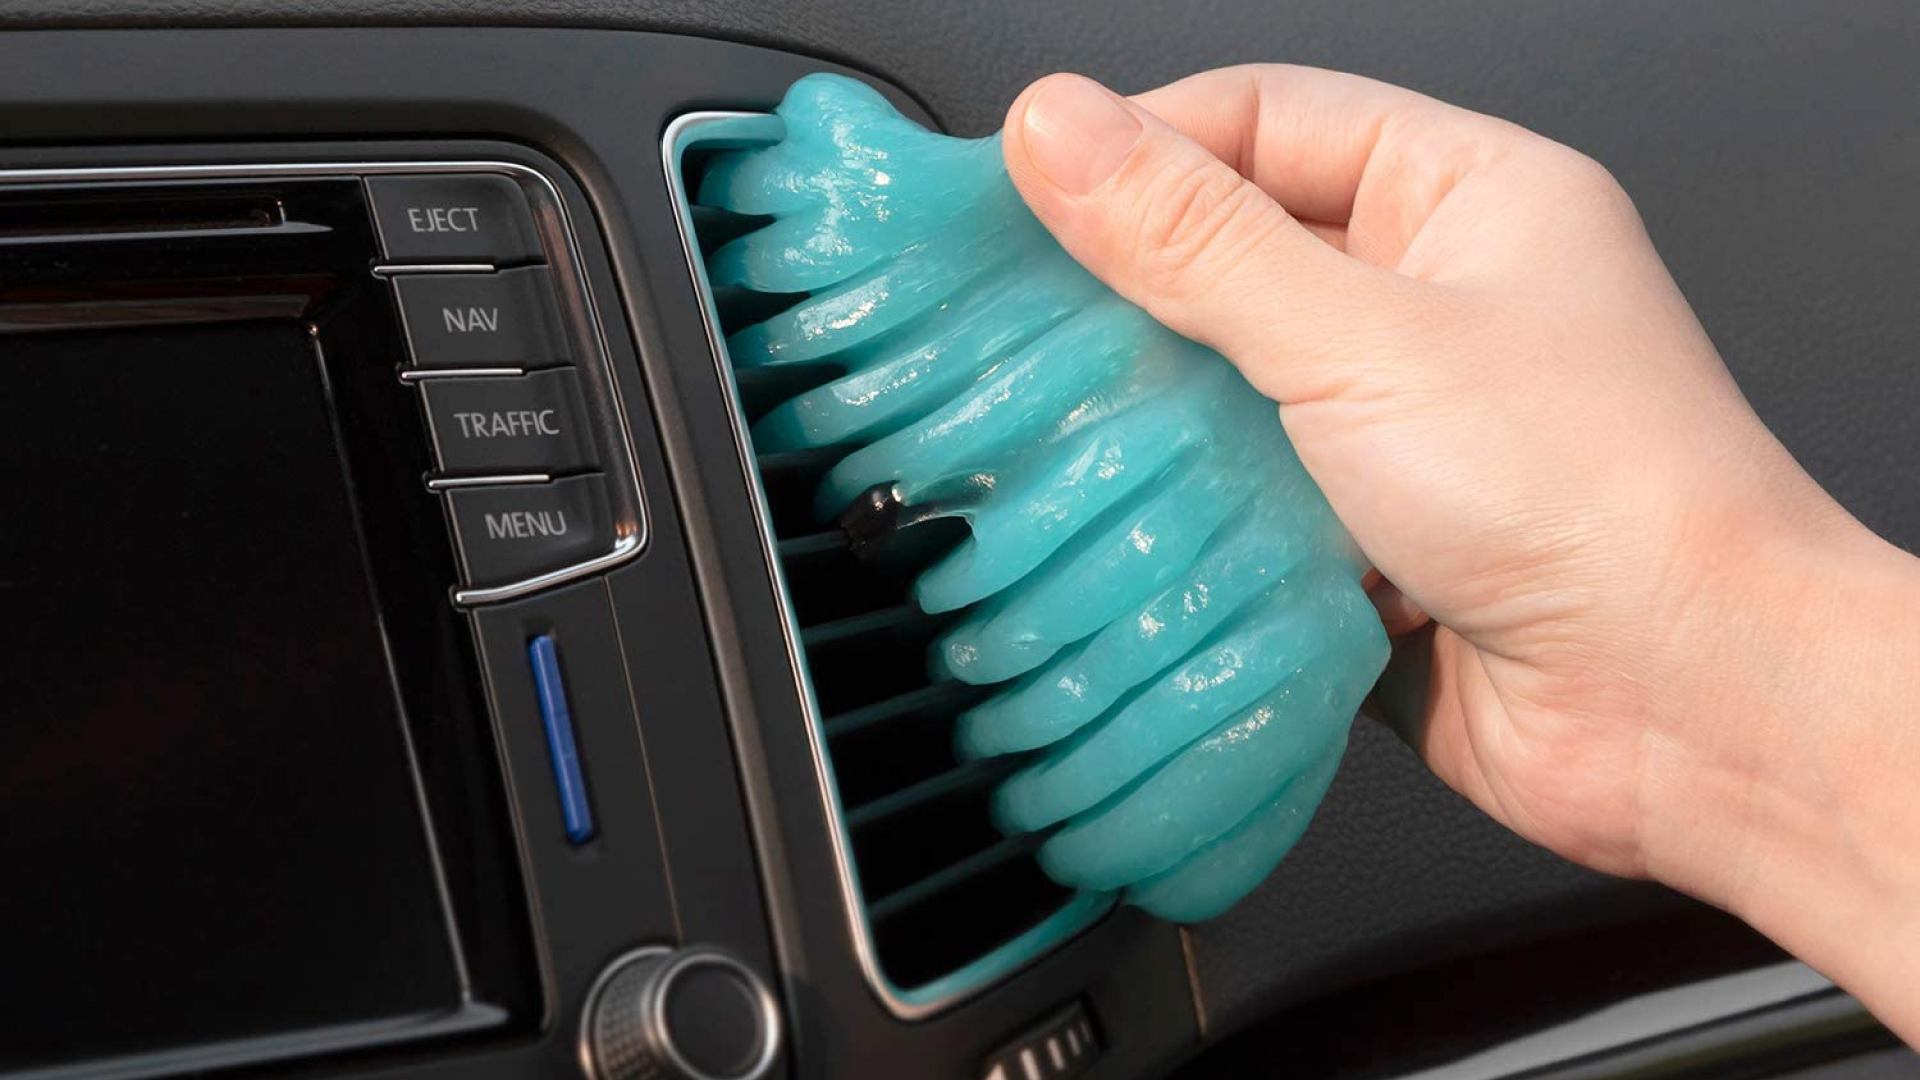 17 Products to Keep Your Car Clean and Organized